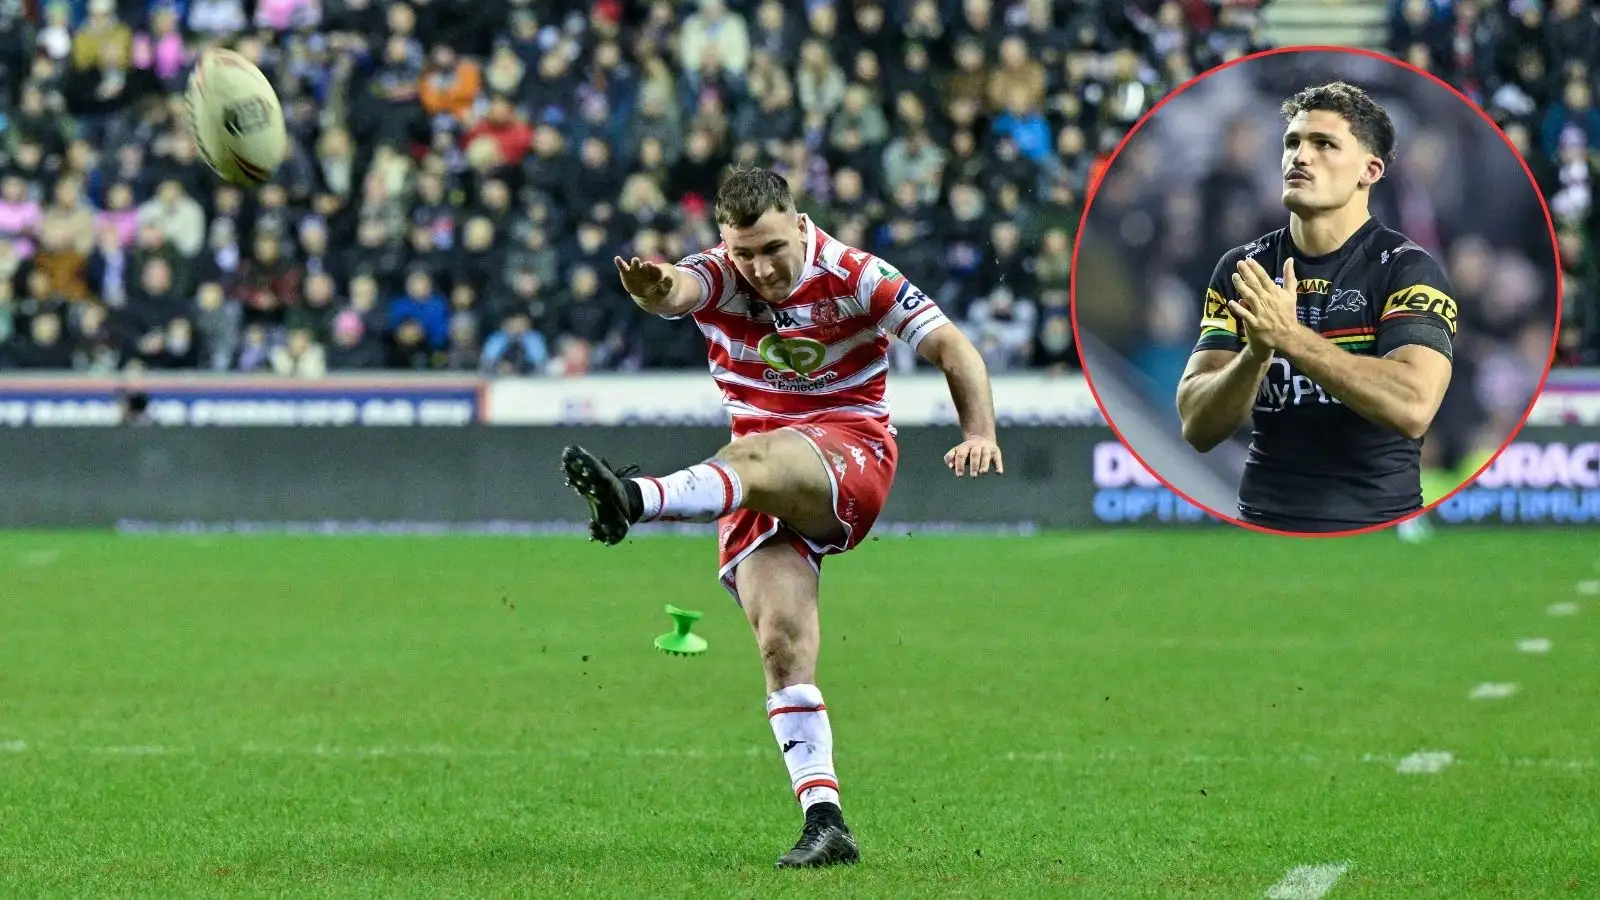 Wigan Warriors’ Harry Smith reveals post-match chat with Nathan Cleary after shirt swap: ‘Credit to him’